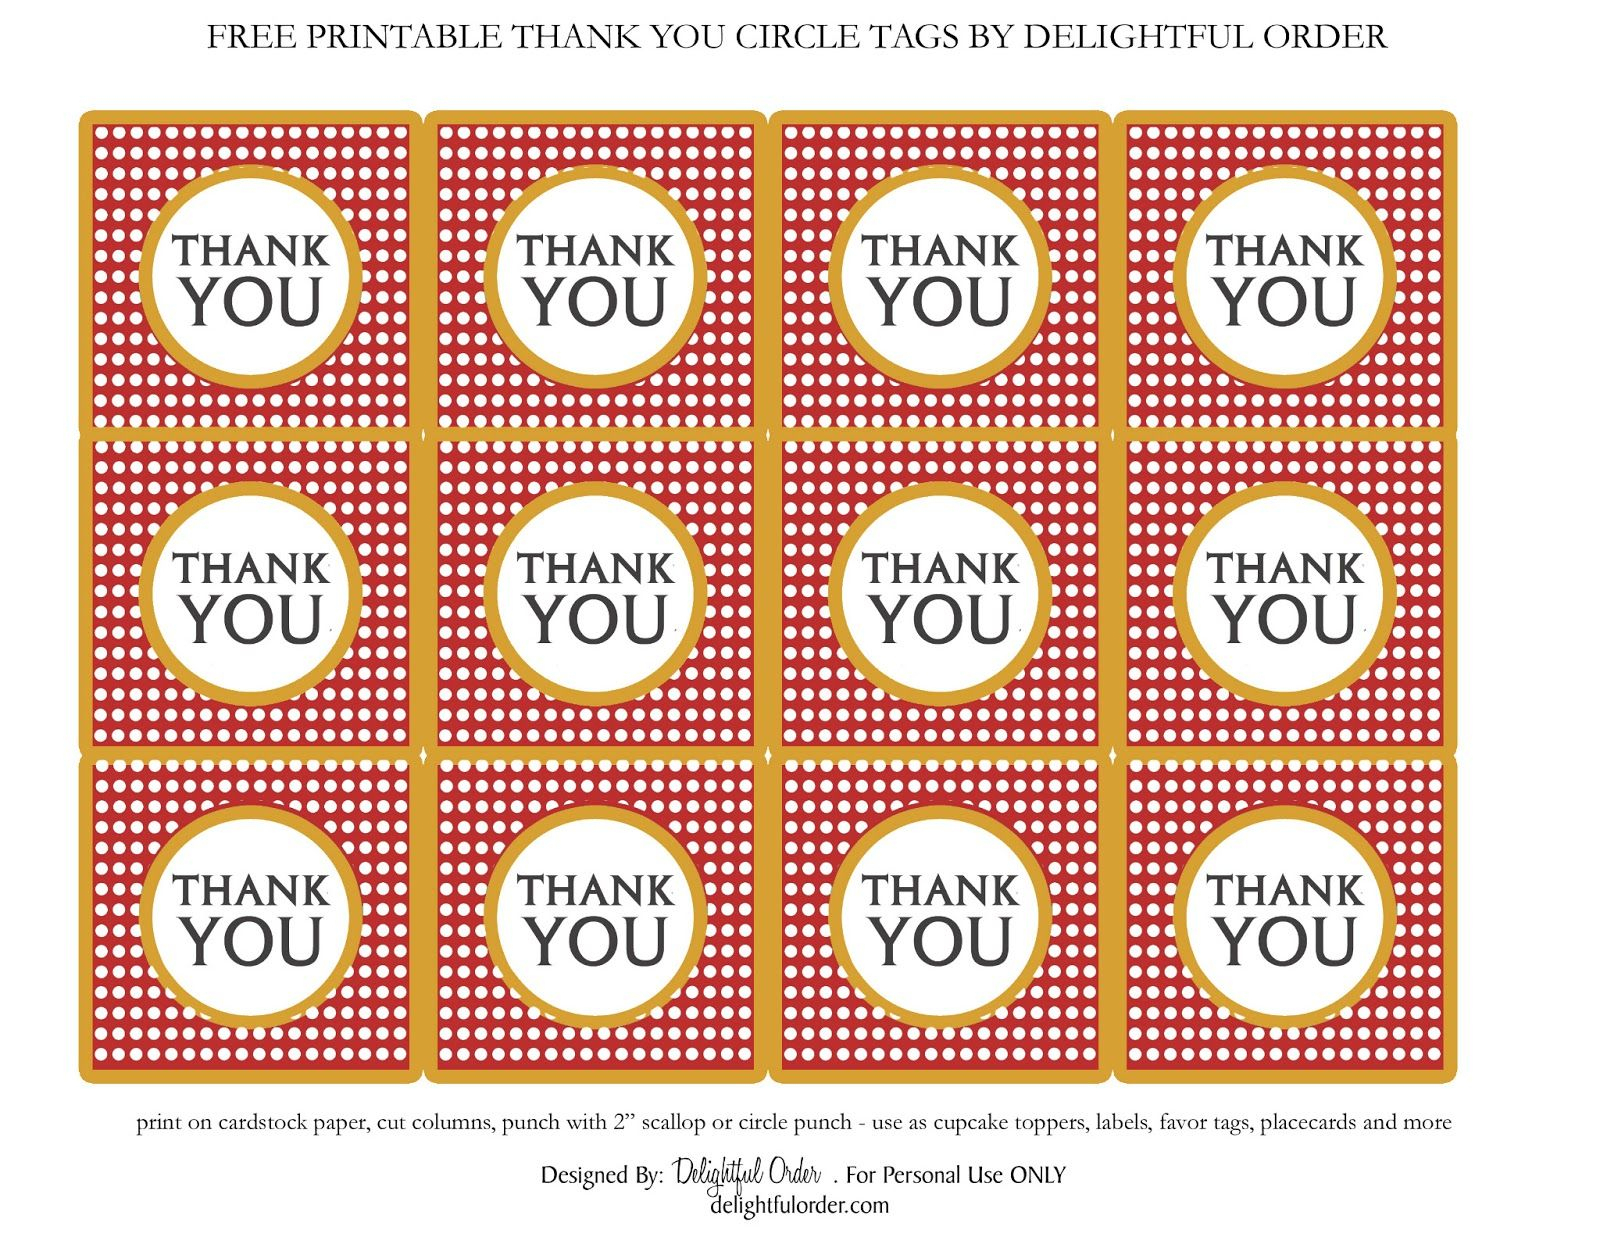 Delightful Order: Free Printable Thank You Circle Tags | Digi - Free Printable Thank You Tags